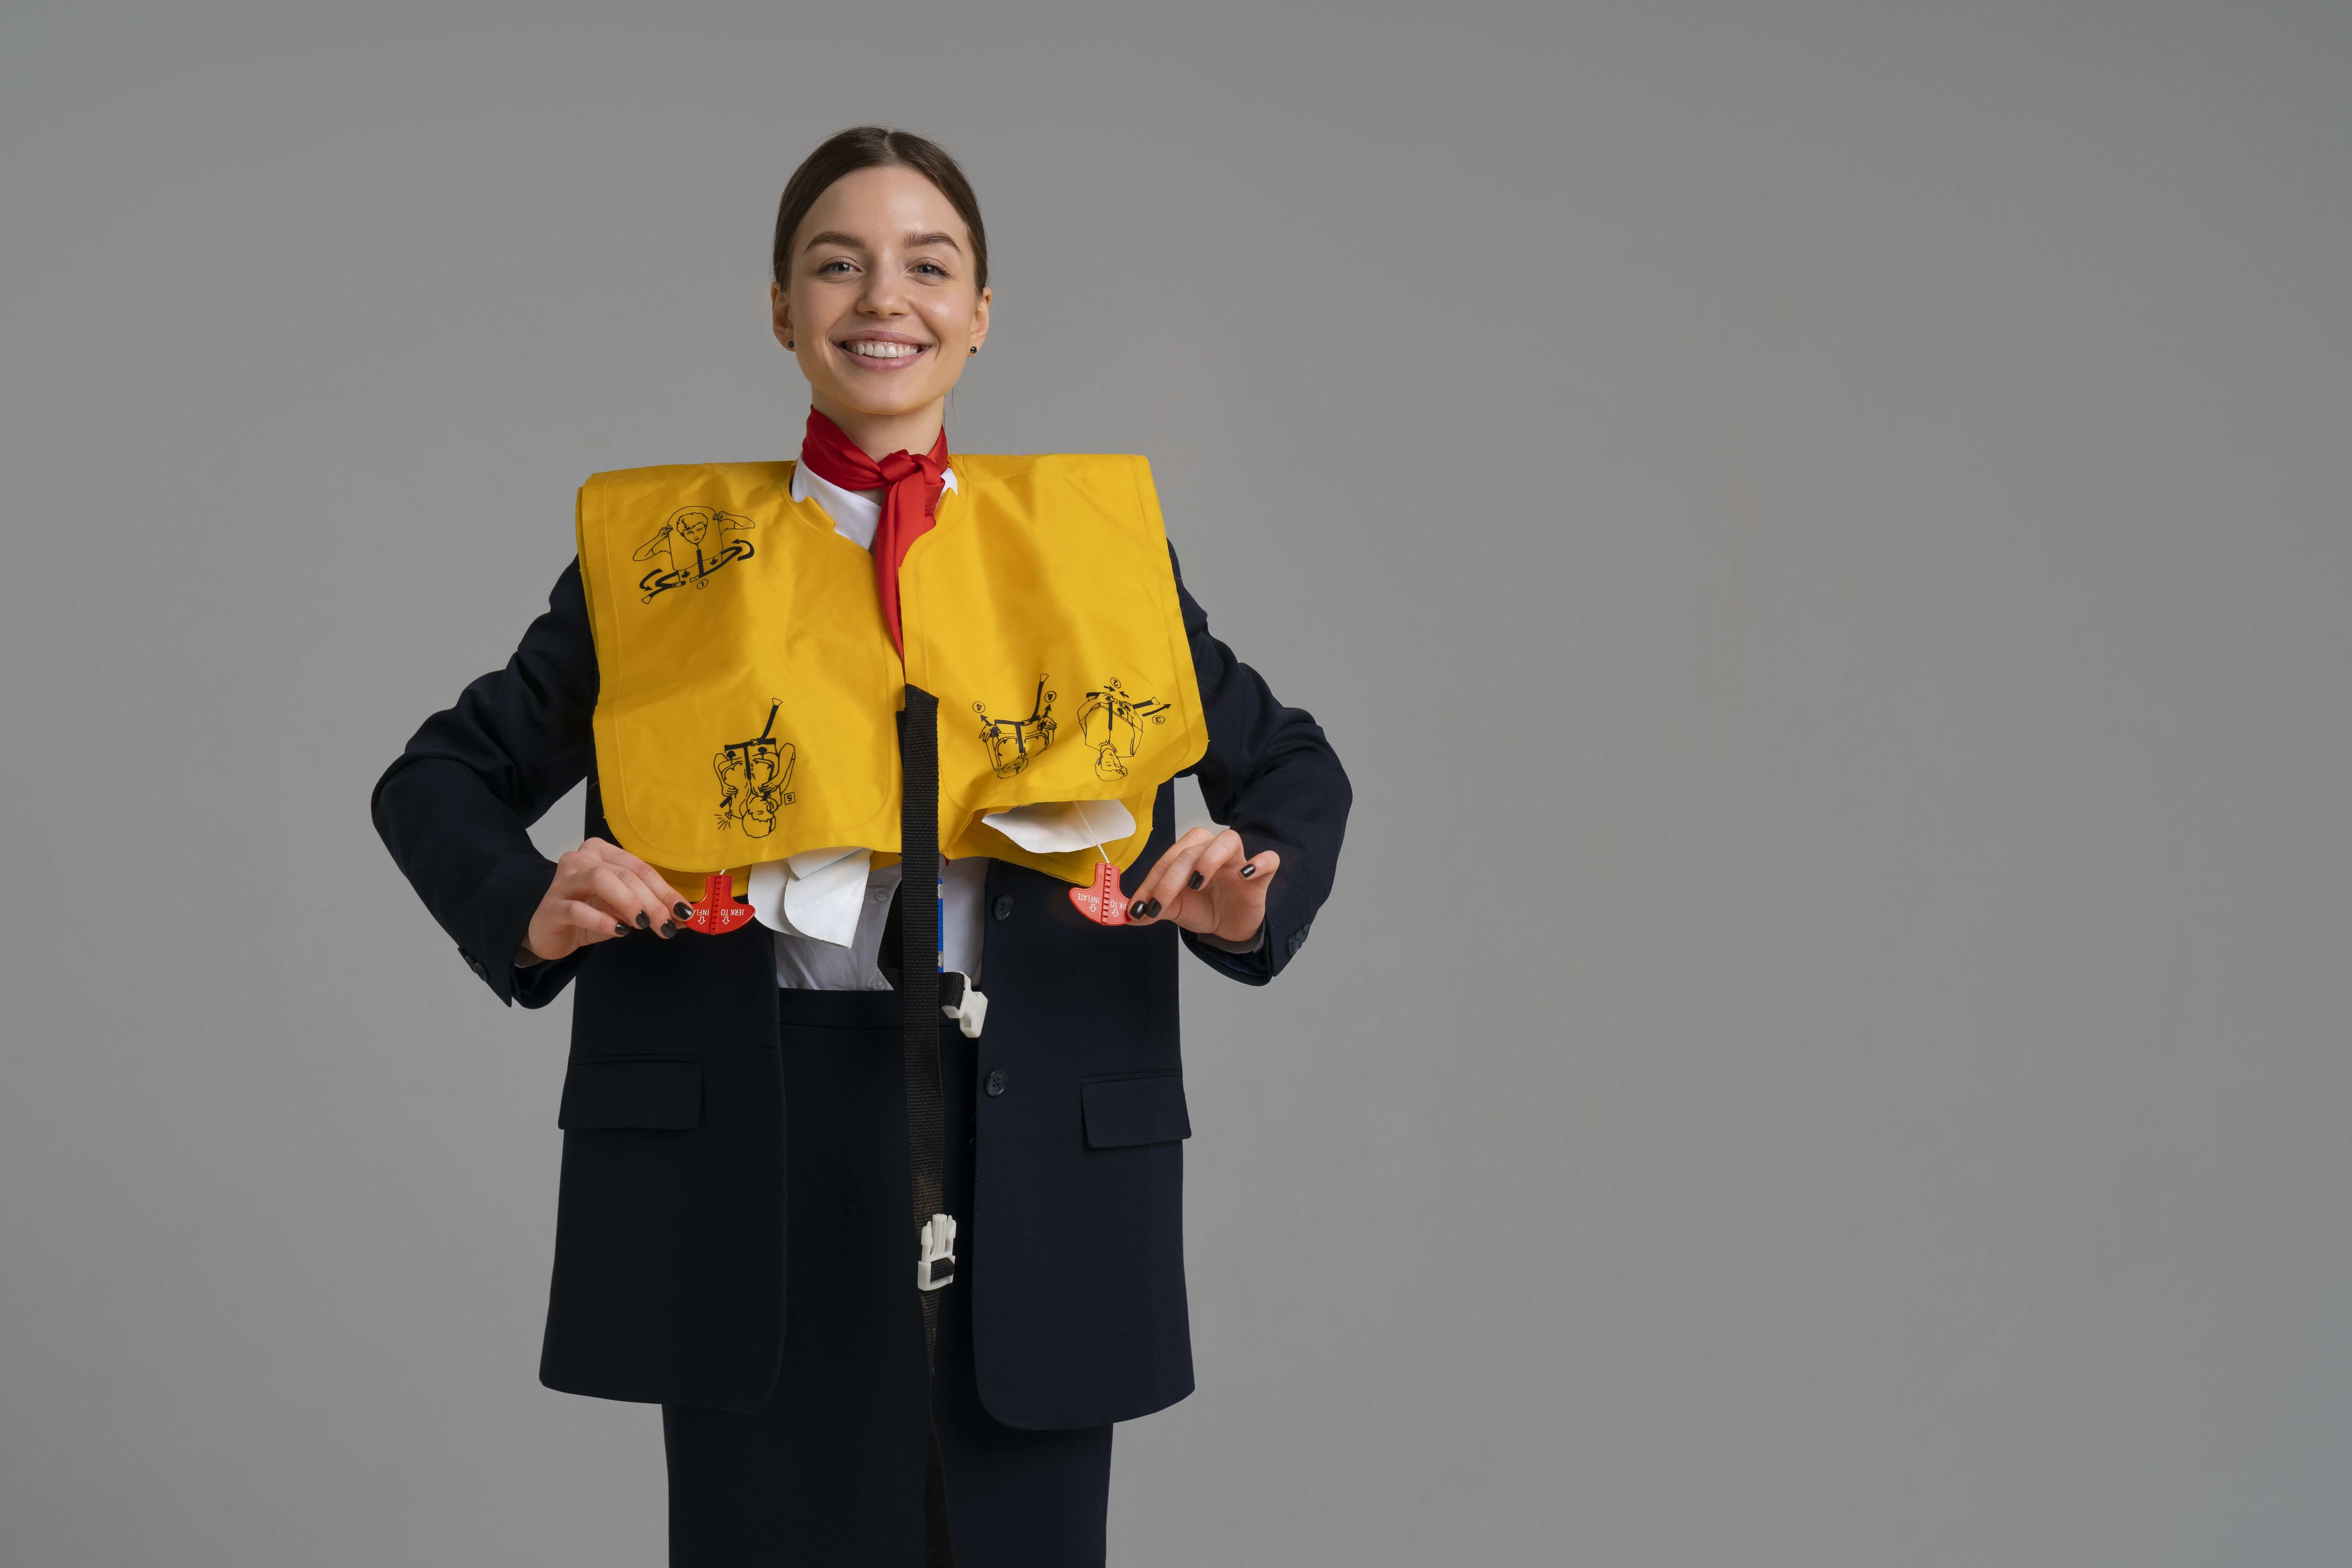 How to Become an Air Hostess, Cabin Crew or Flight Attendant